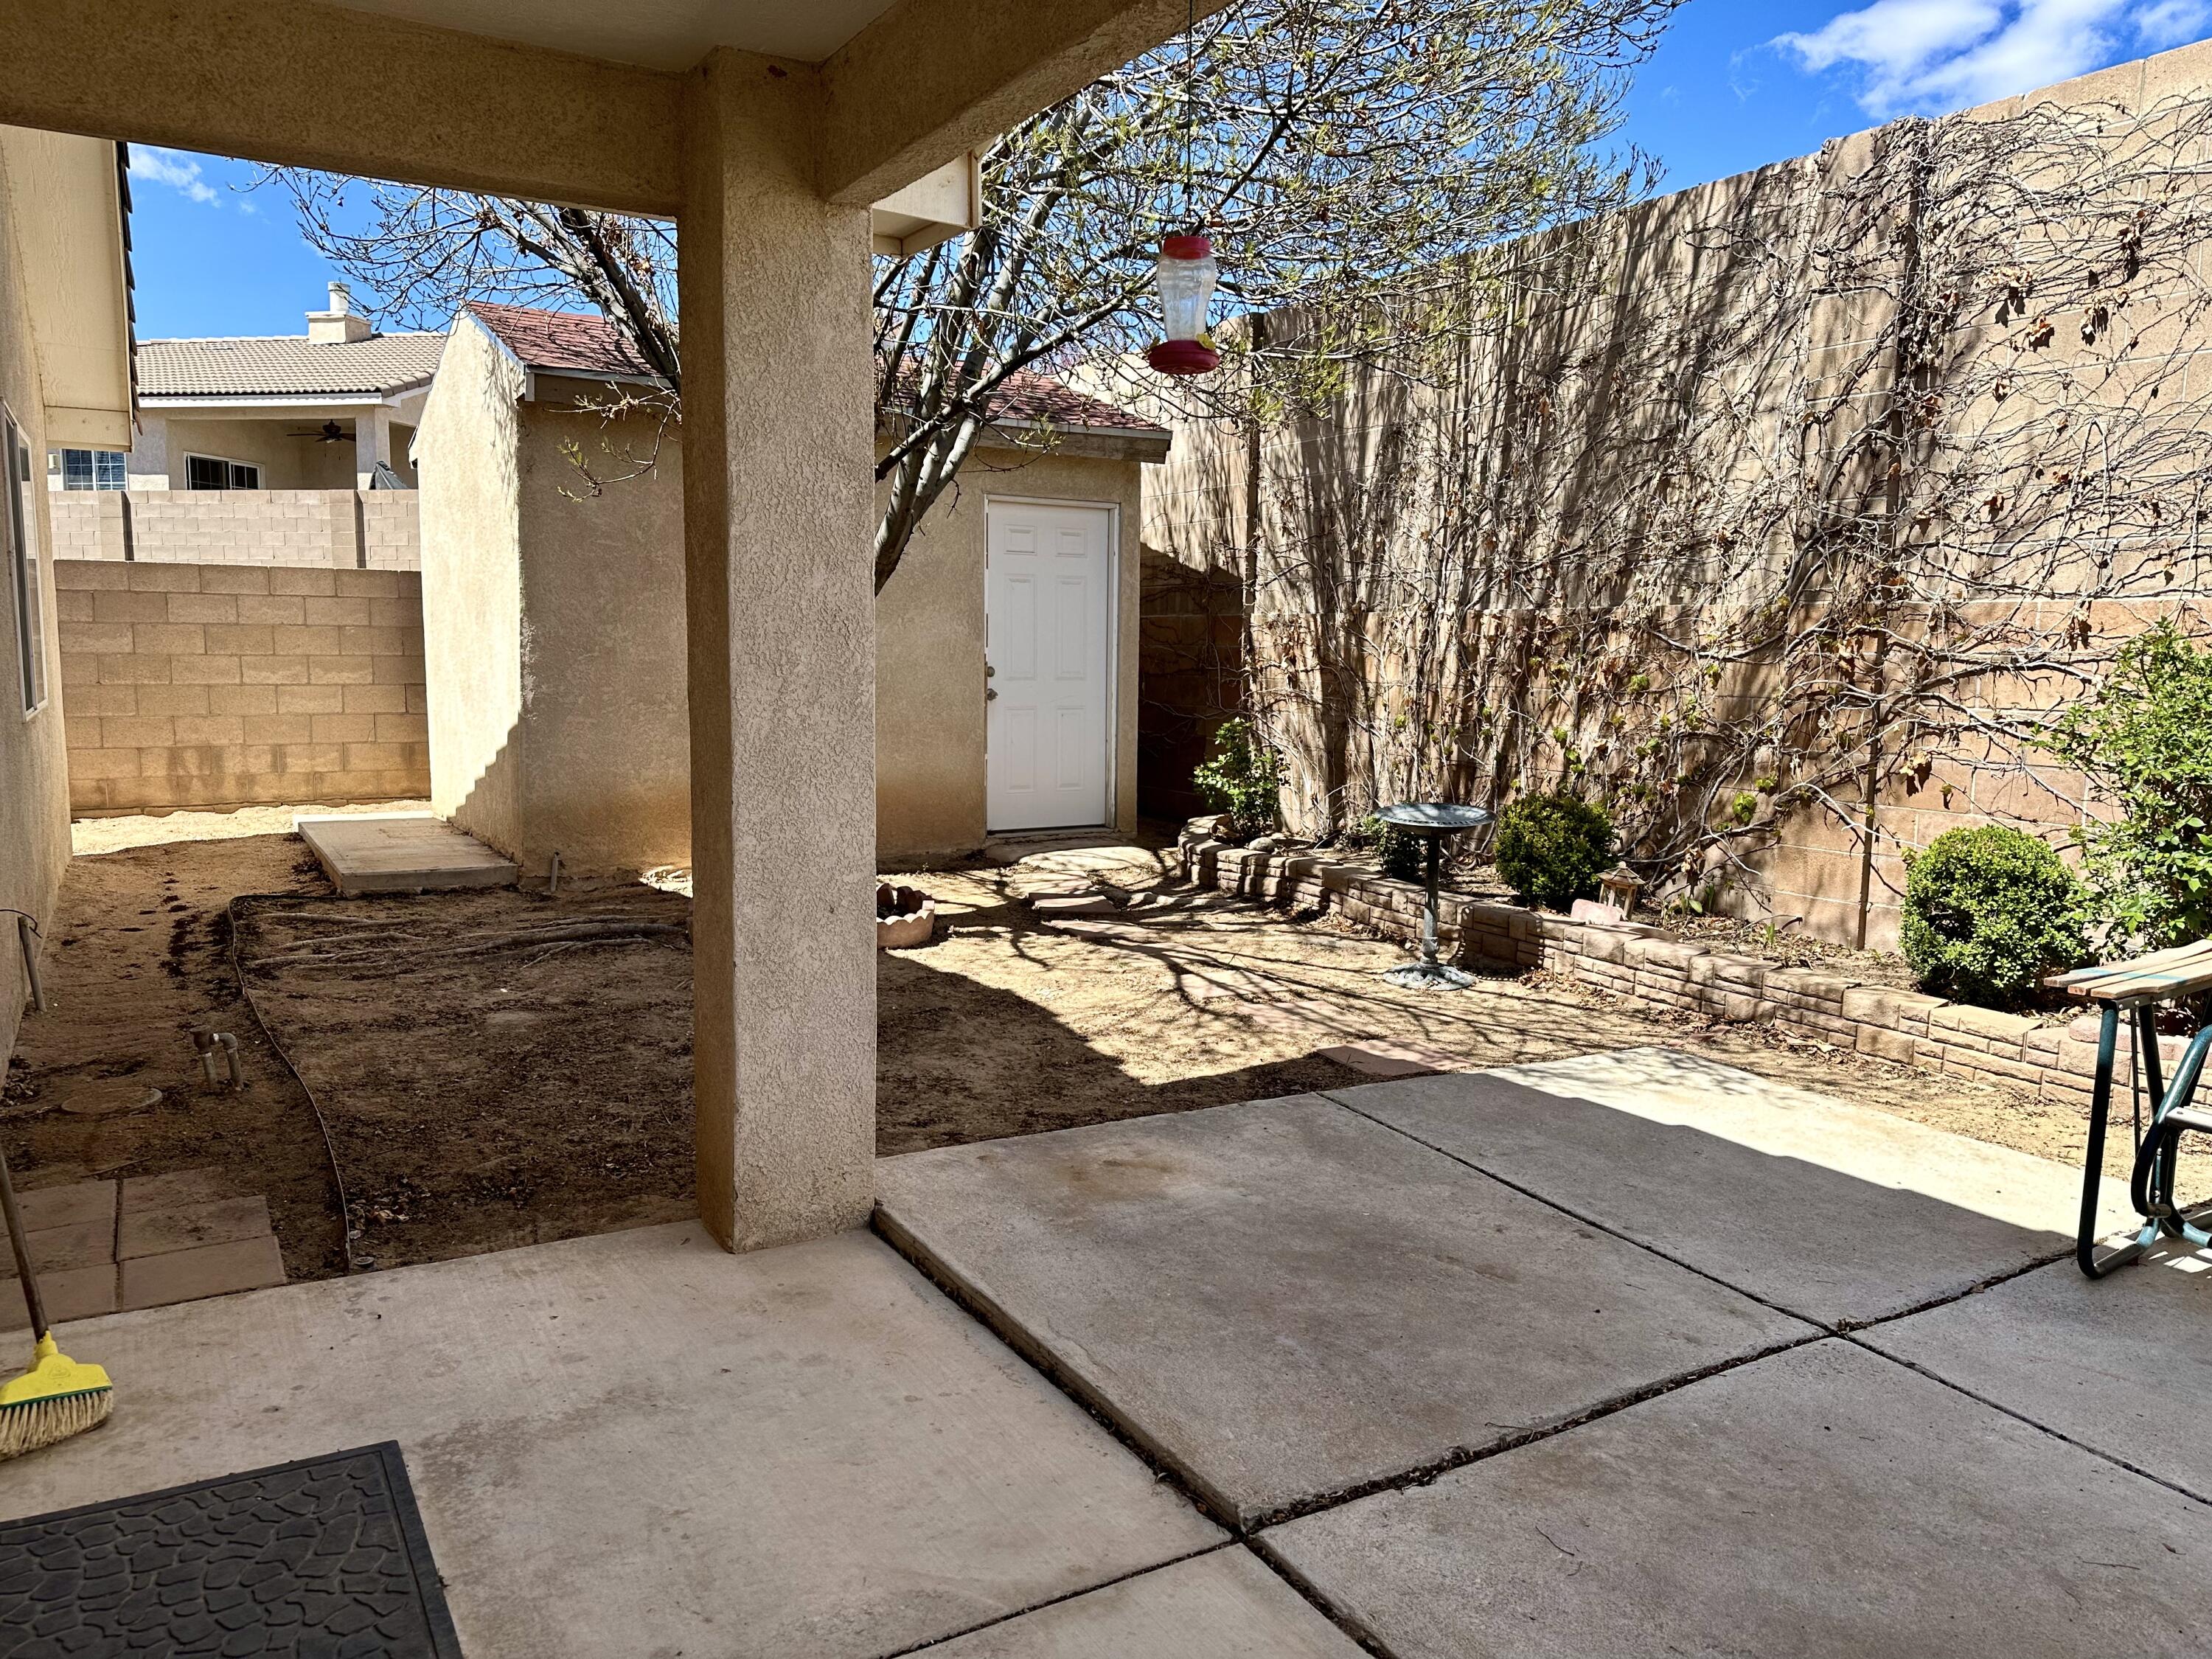 5643 Bald Eagle Road NW, Albuquerque, New Mexico 87114, 3 Bedrooms Bedrooms, ,2 BathroomsBathrooms,Residential,For Sale,5643 Bald Eagle Road NW,1059448